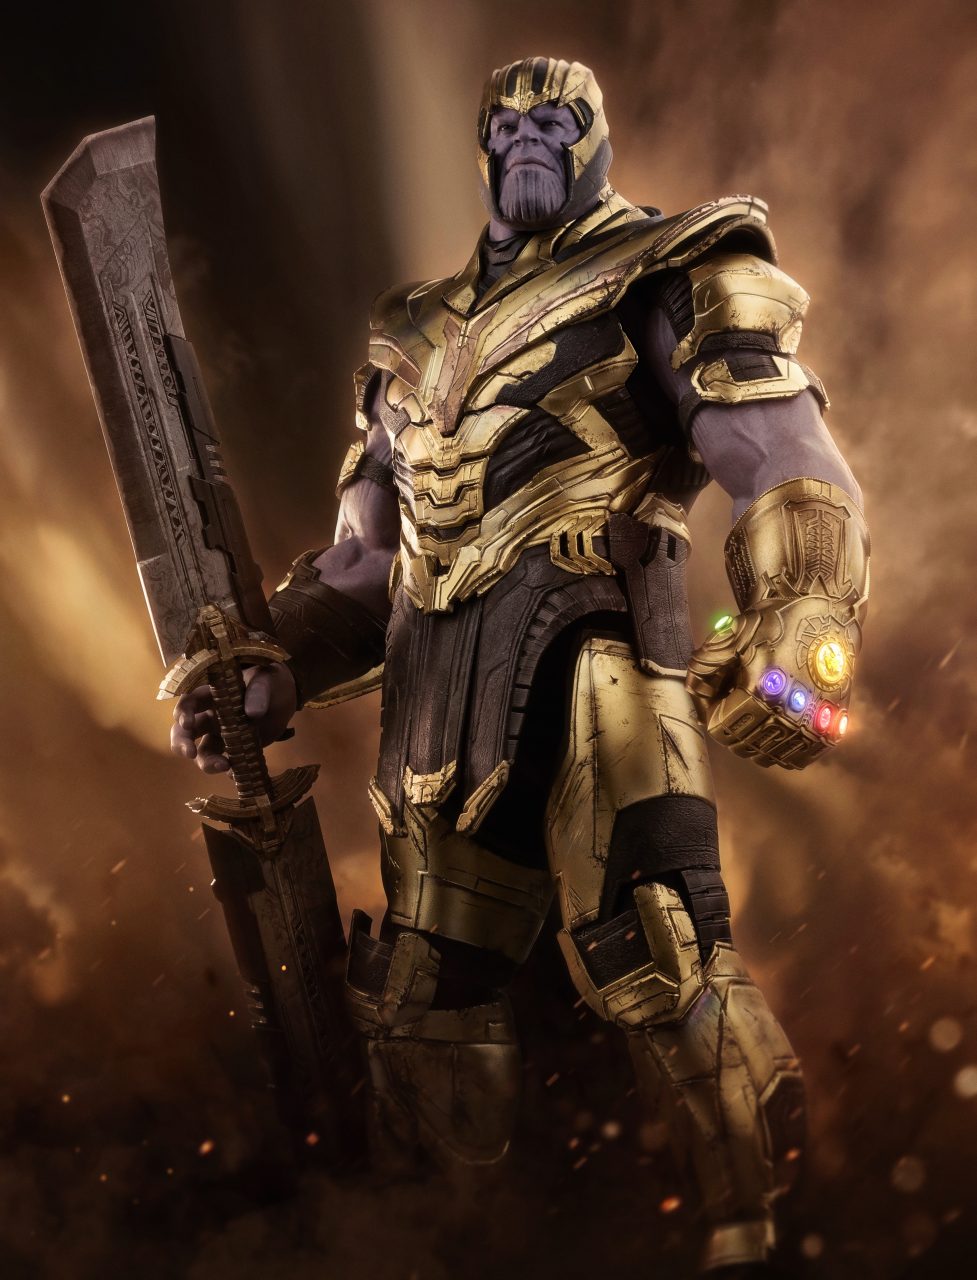 1/6th scale Thanos Collectible Figure